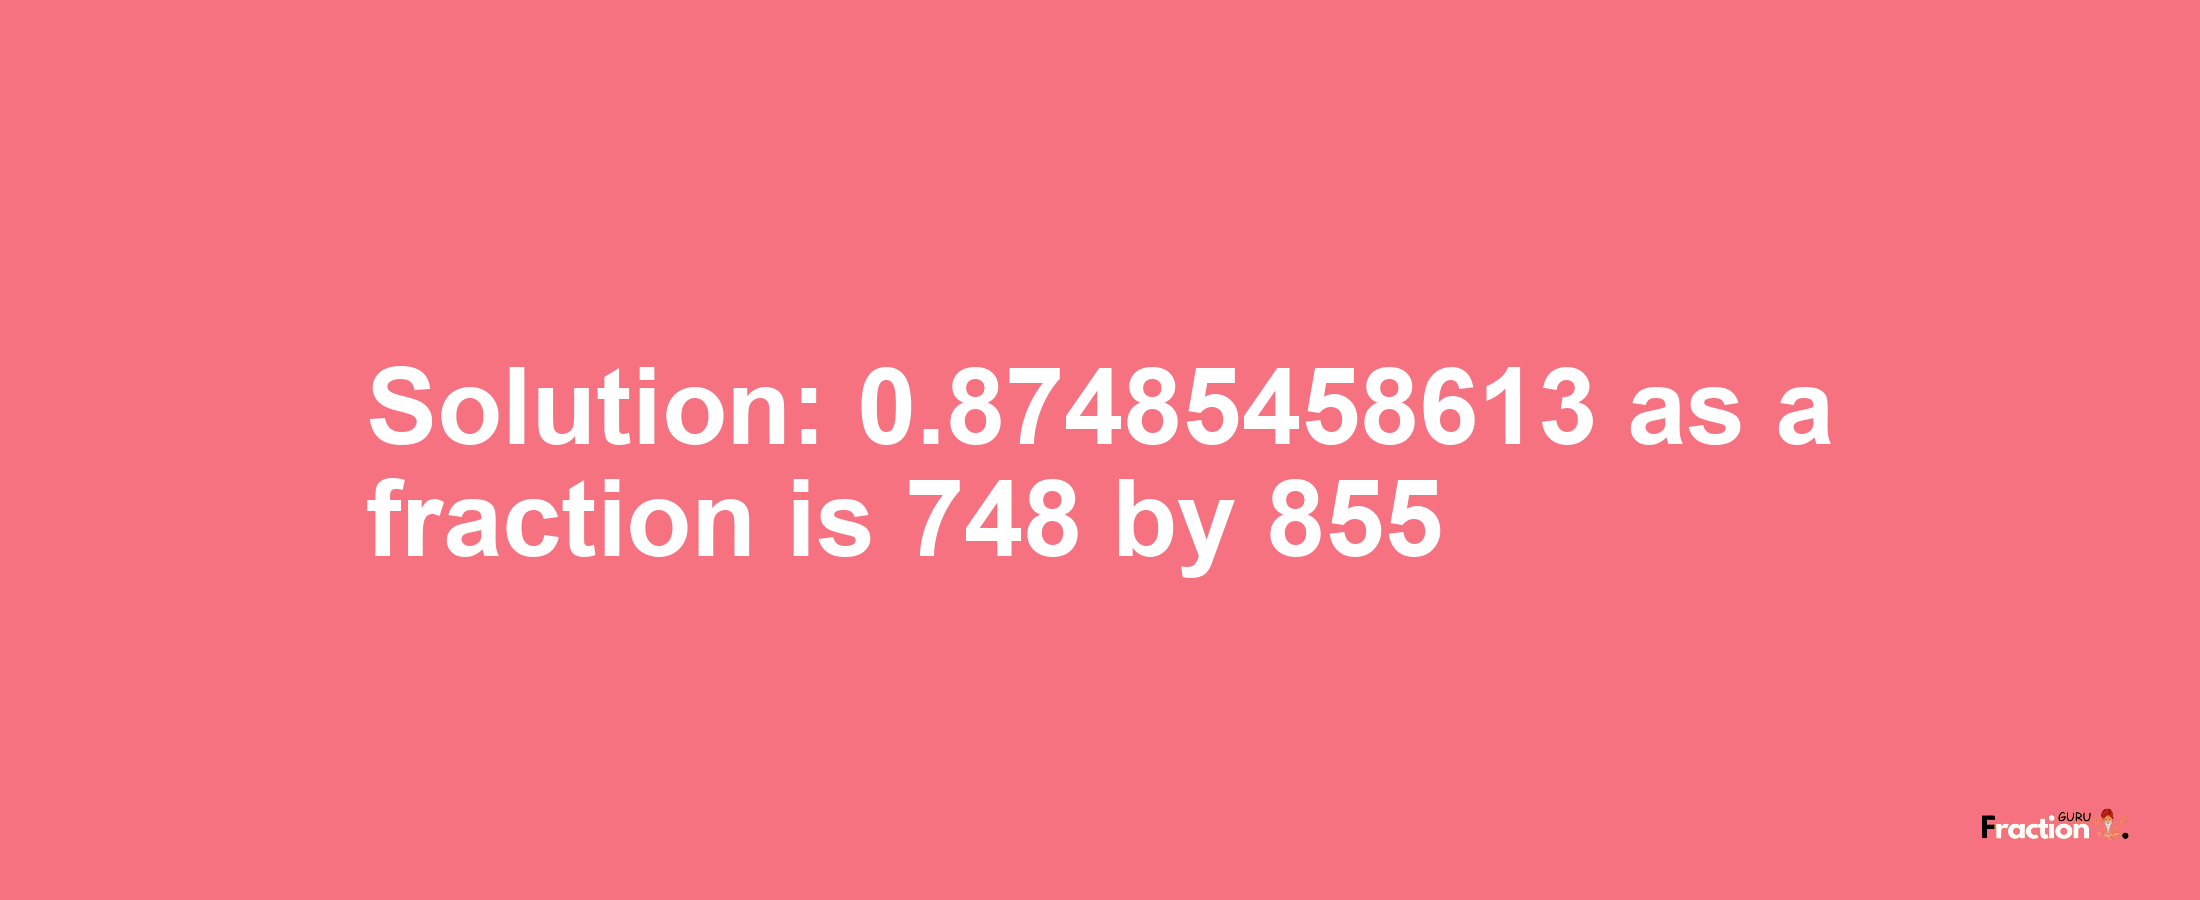 Solution:0.87485458613 as a fraction is 748/855